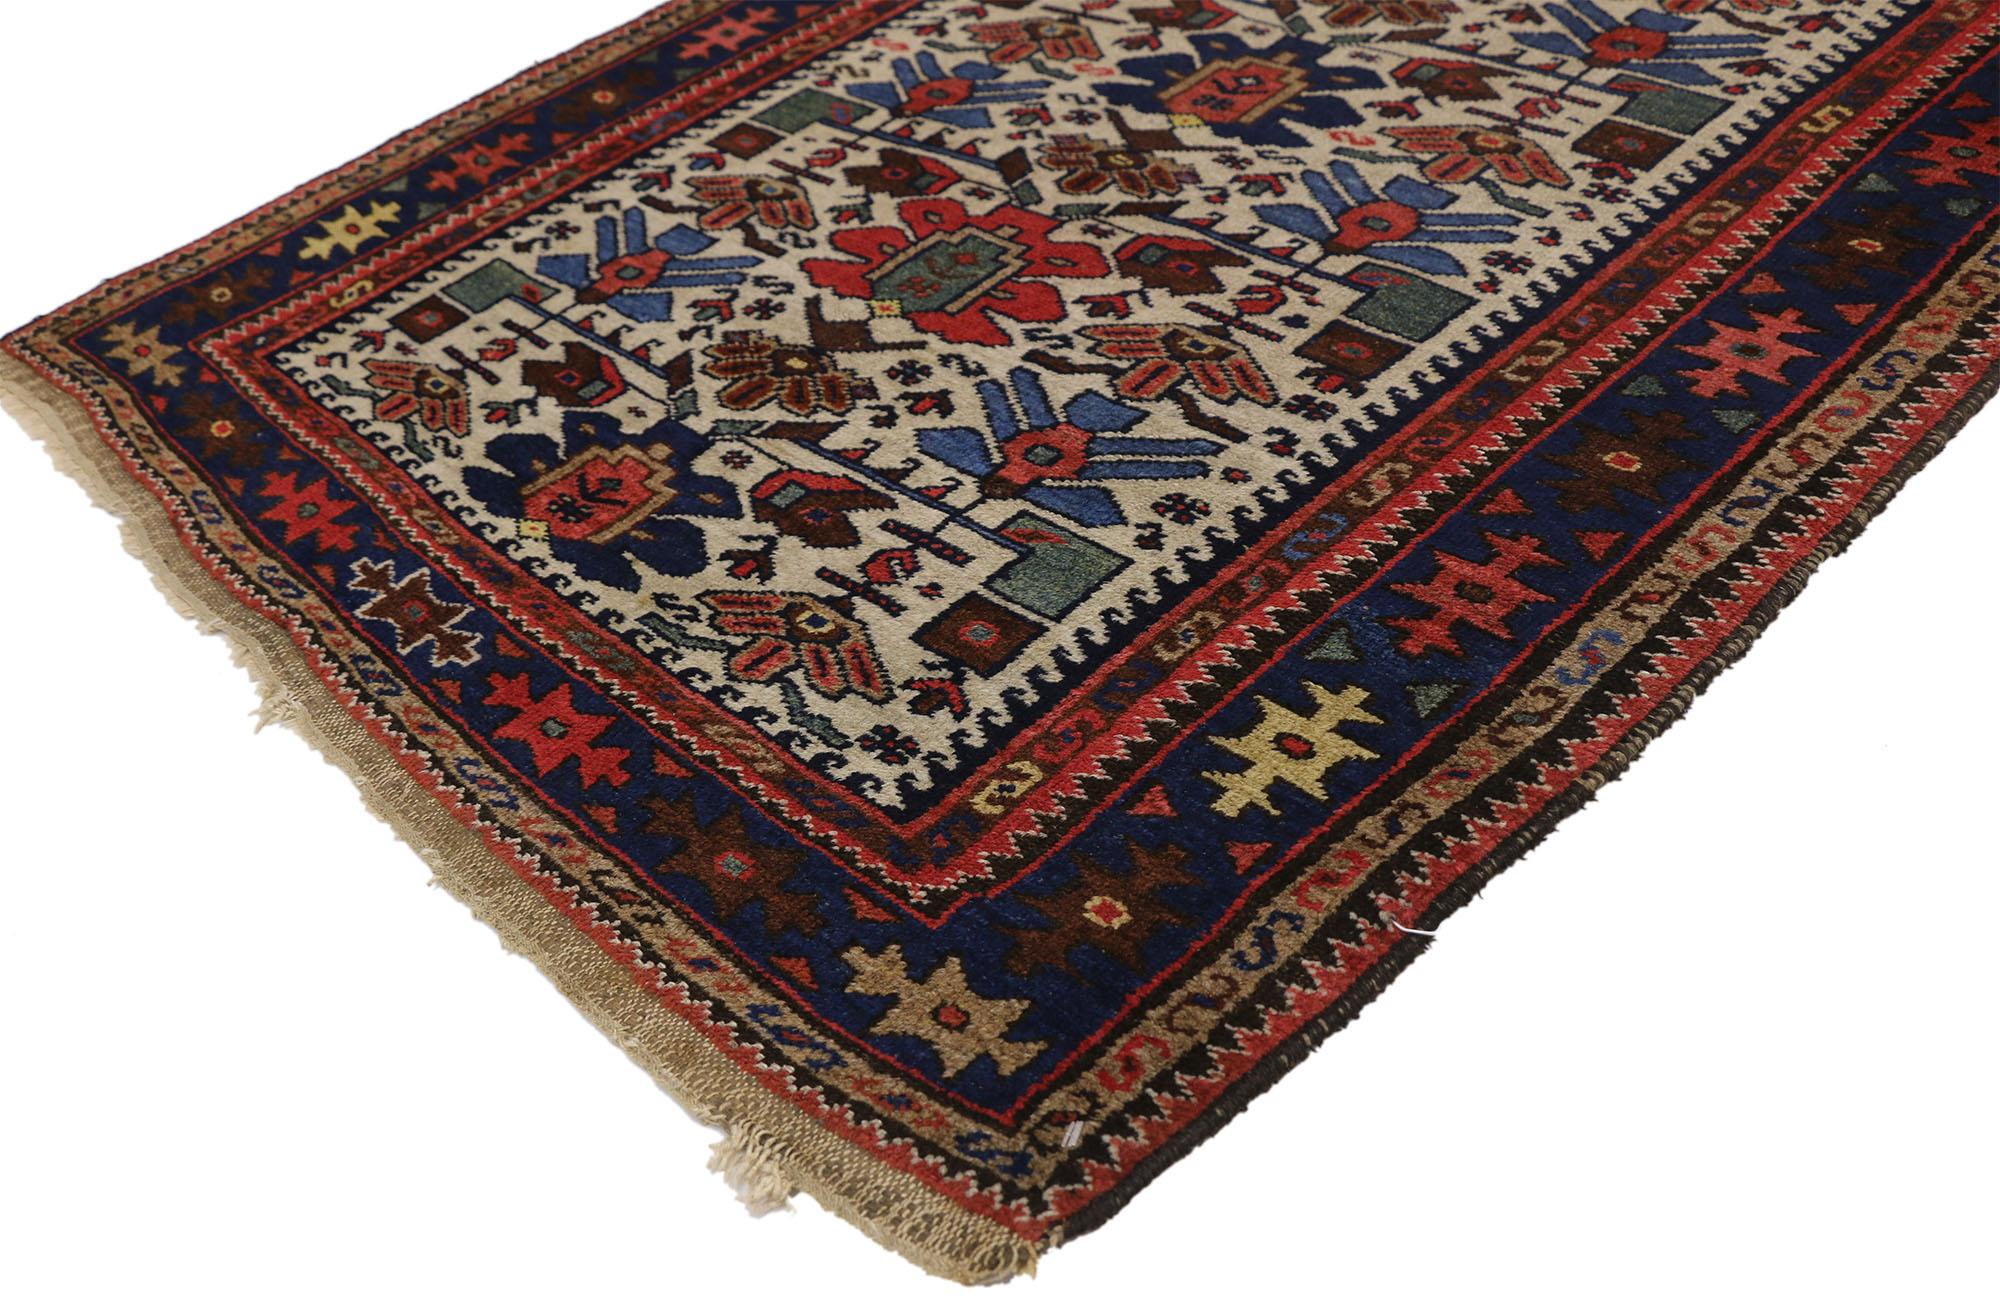 73321 Antique Persian Malayer Rug 03'04 x 06'05.
This hand knotted wool antique Persian Malayer rug features the stylized Mina Khani design. A lively geometric all-over pattern of poly-chromatic motifs contrast beautifully on the ivory backdrop. An